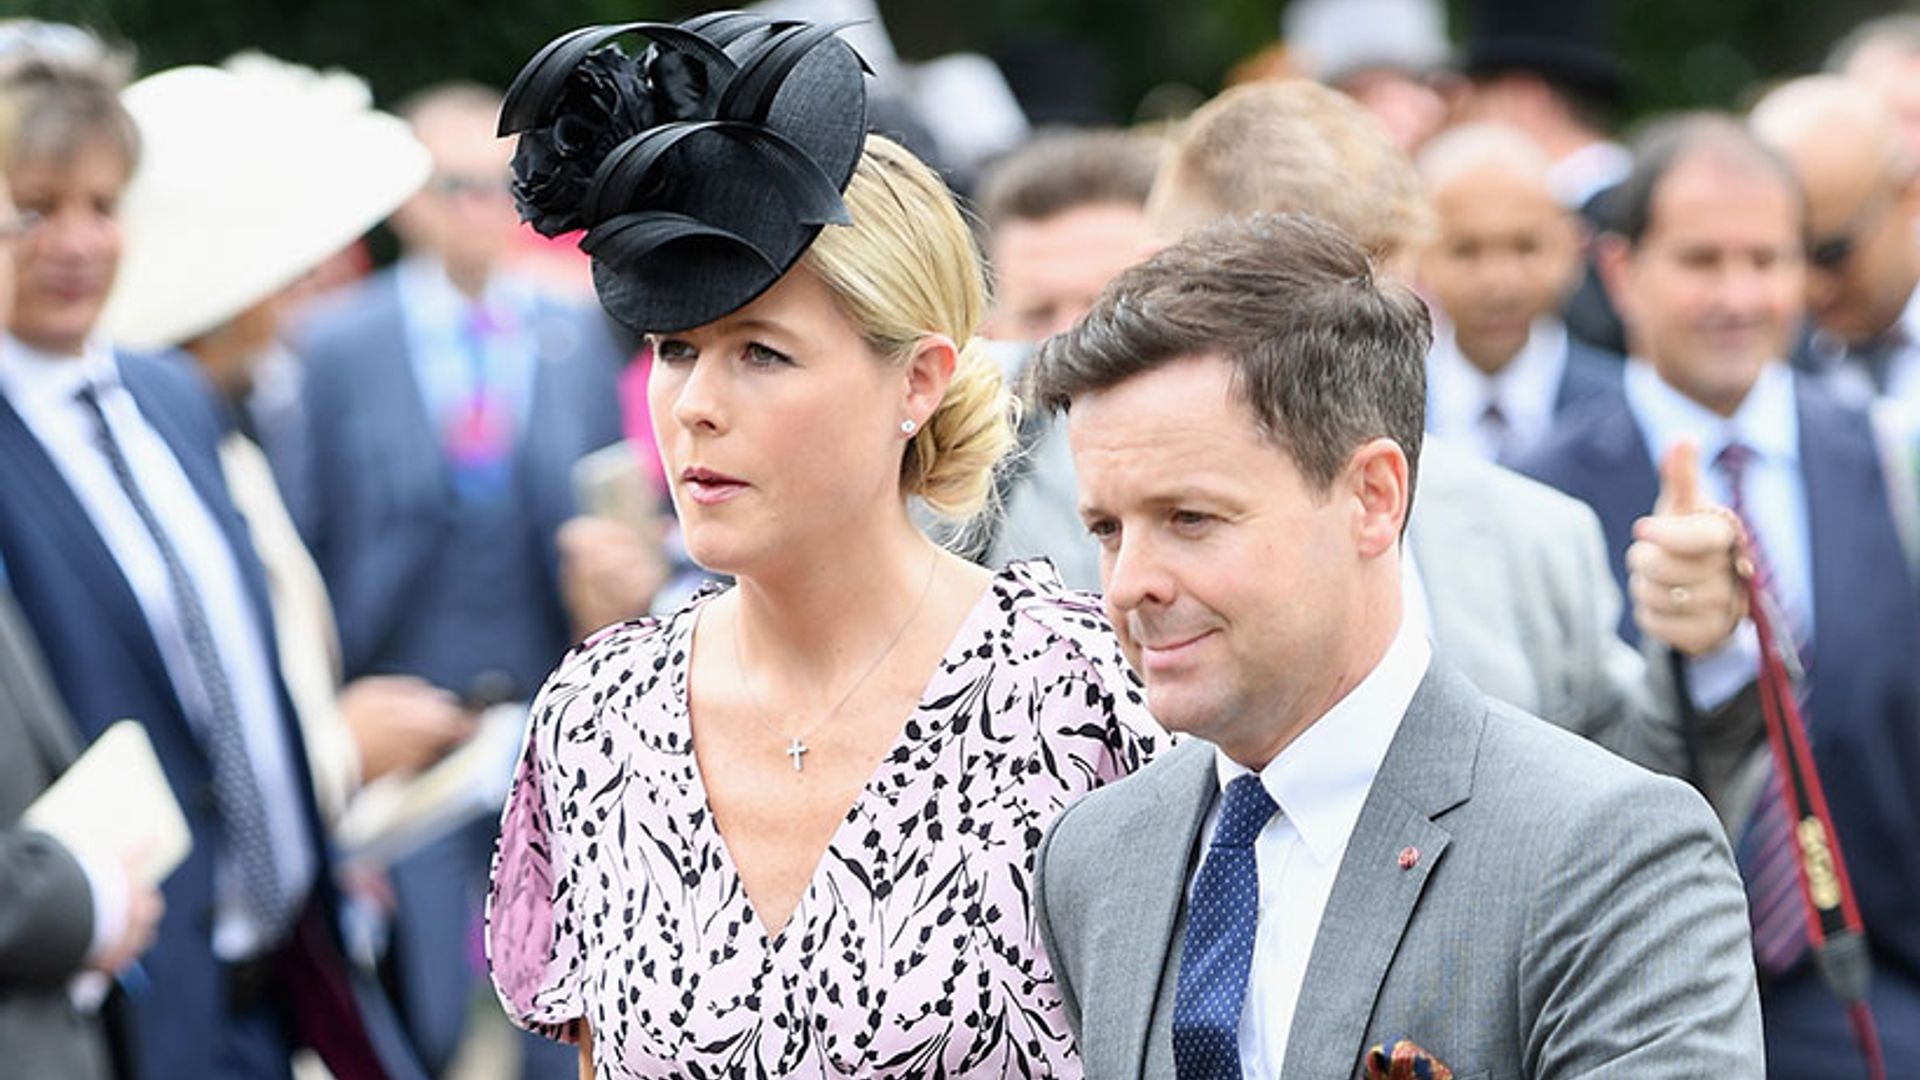 Declan Donnelly and pregnant wife Ali Astall put on a loving display at Royal Ascot